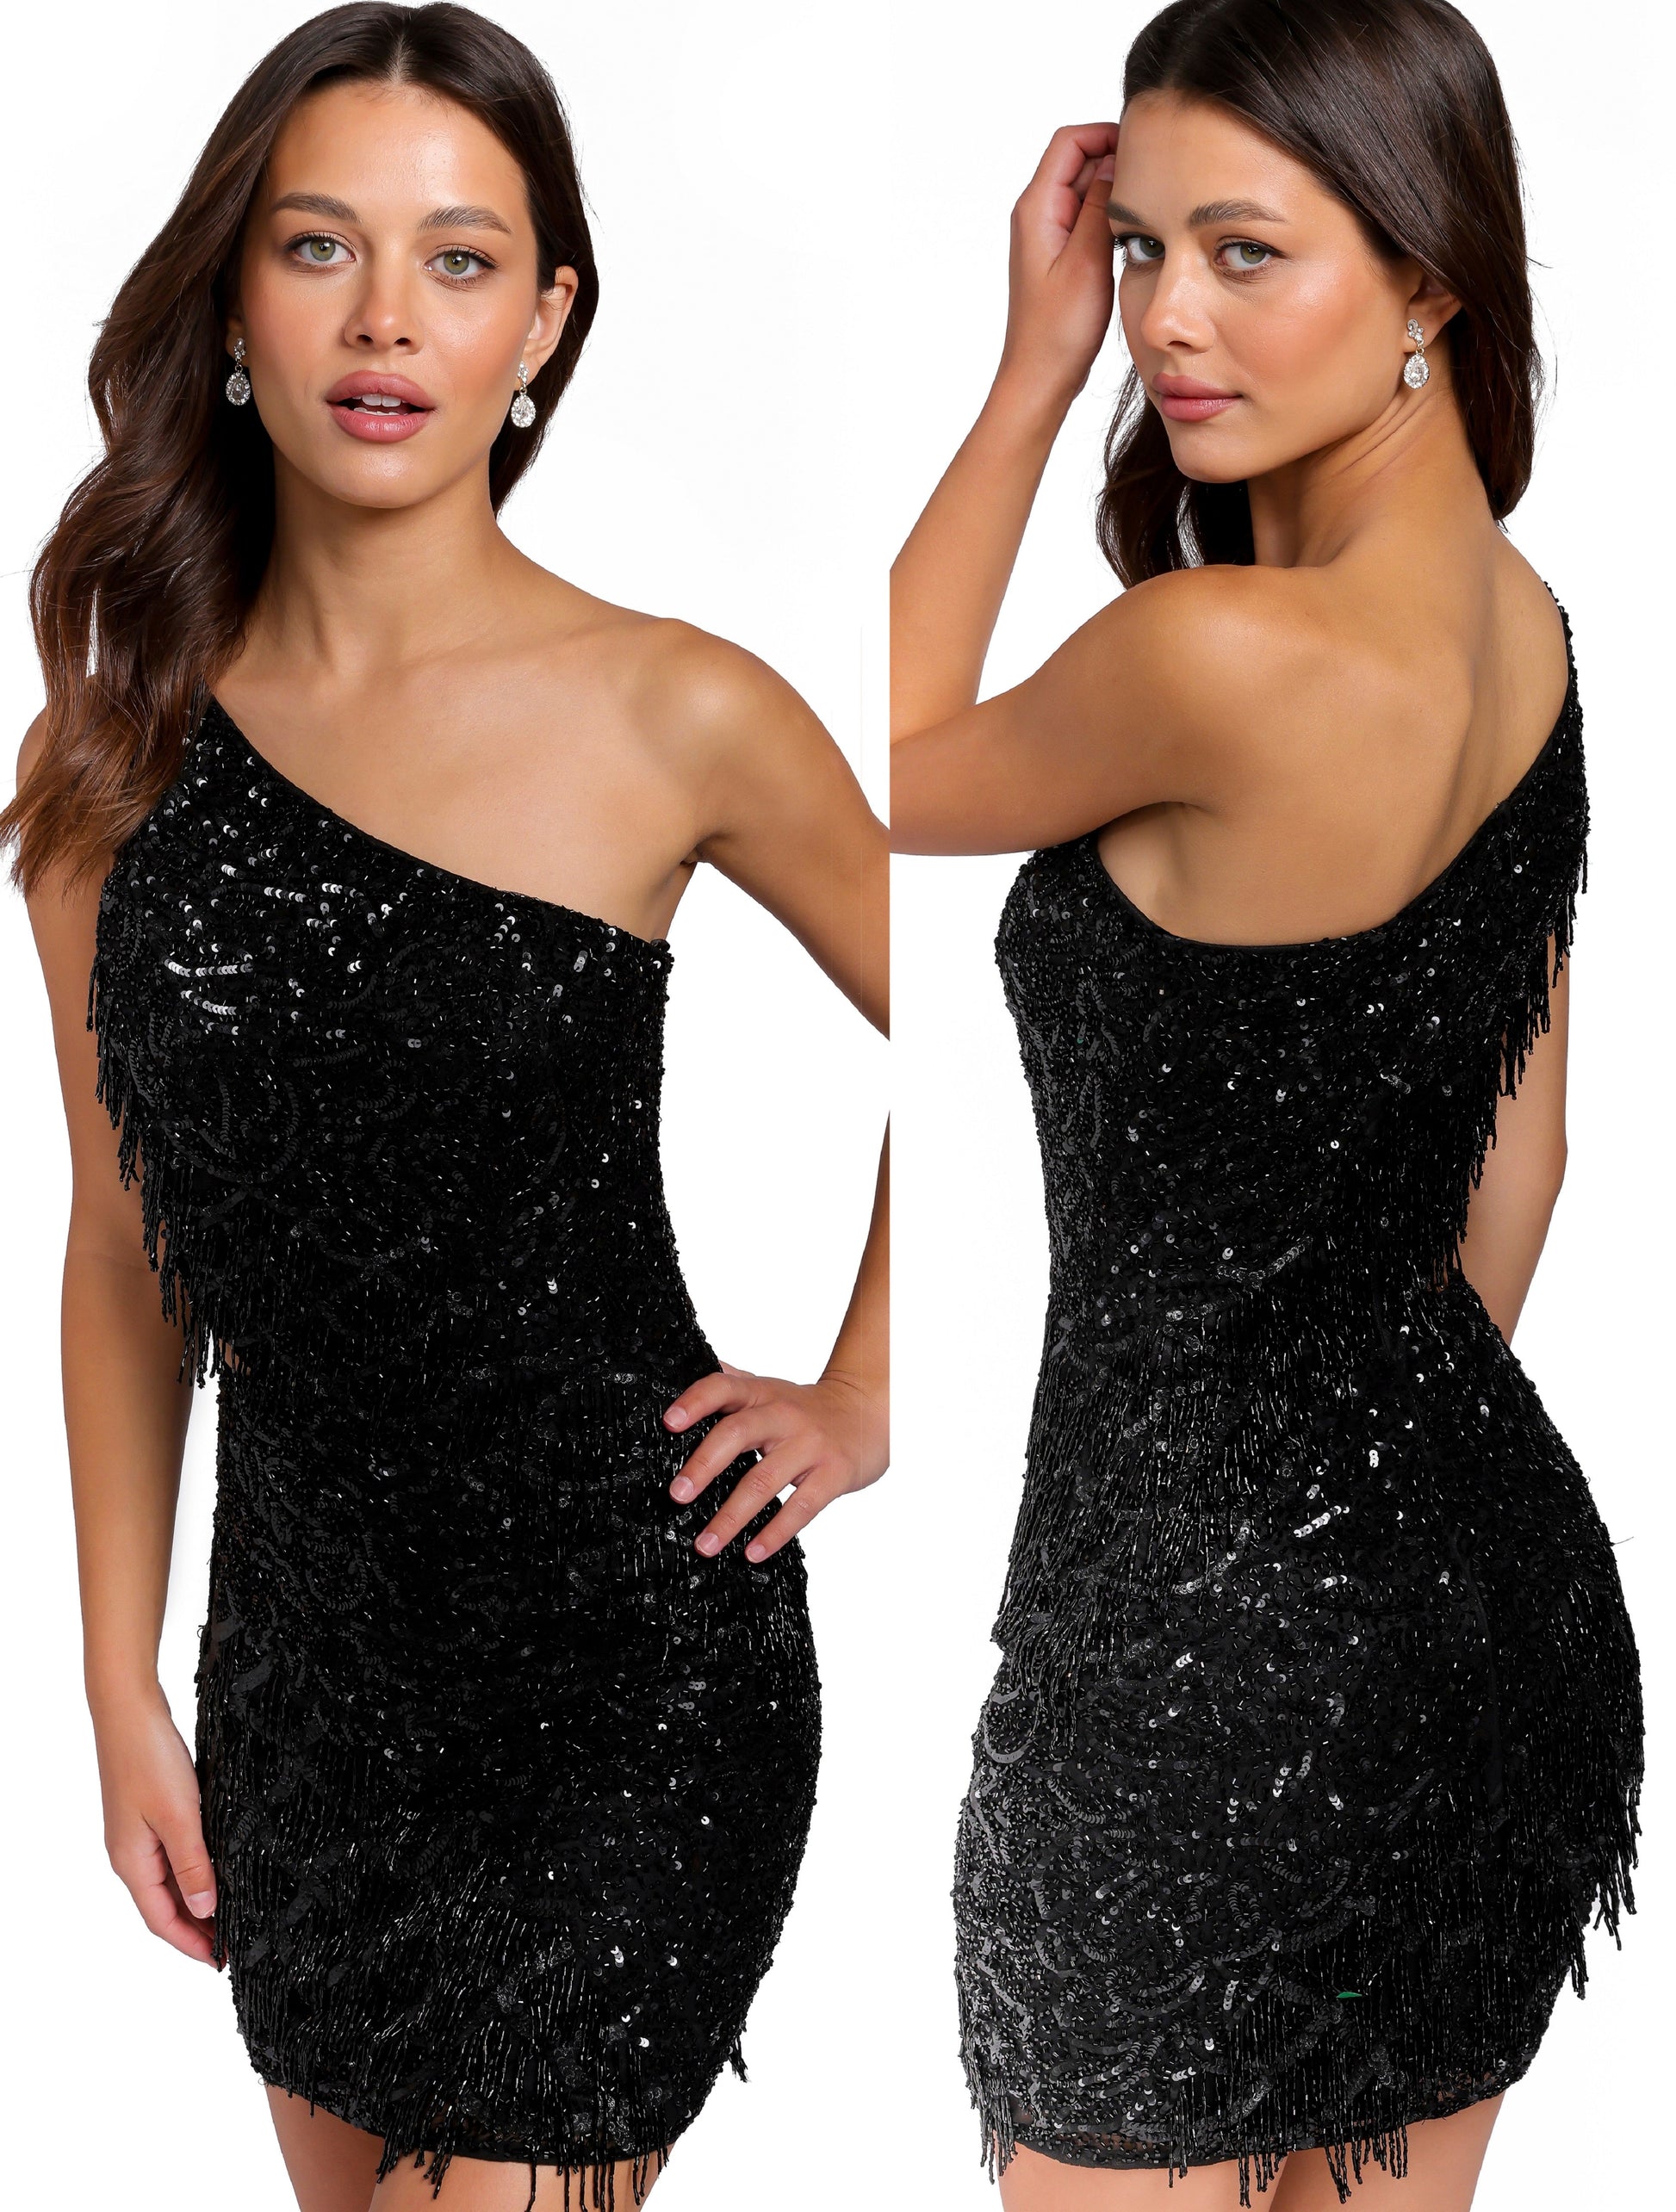 Primavera Couture 3836 Short Homecoming Dress Fitted Sequin